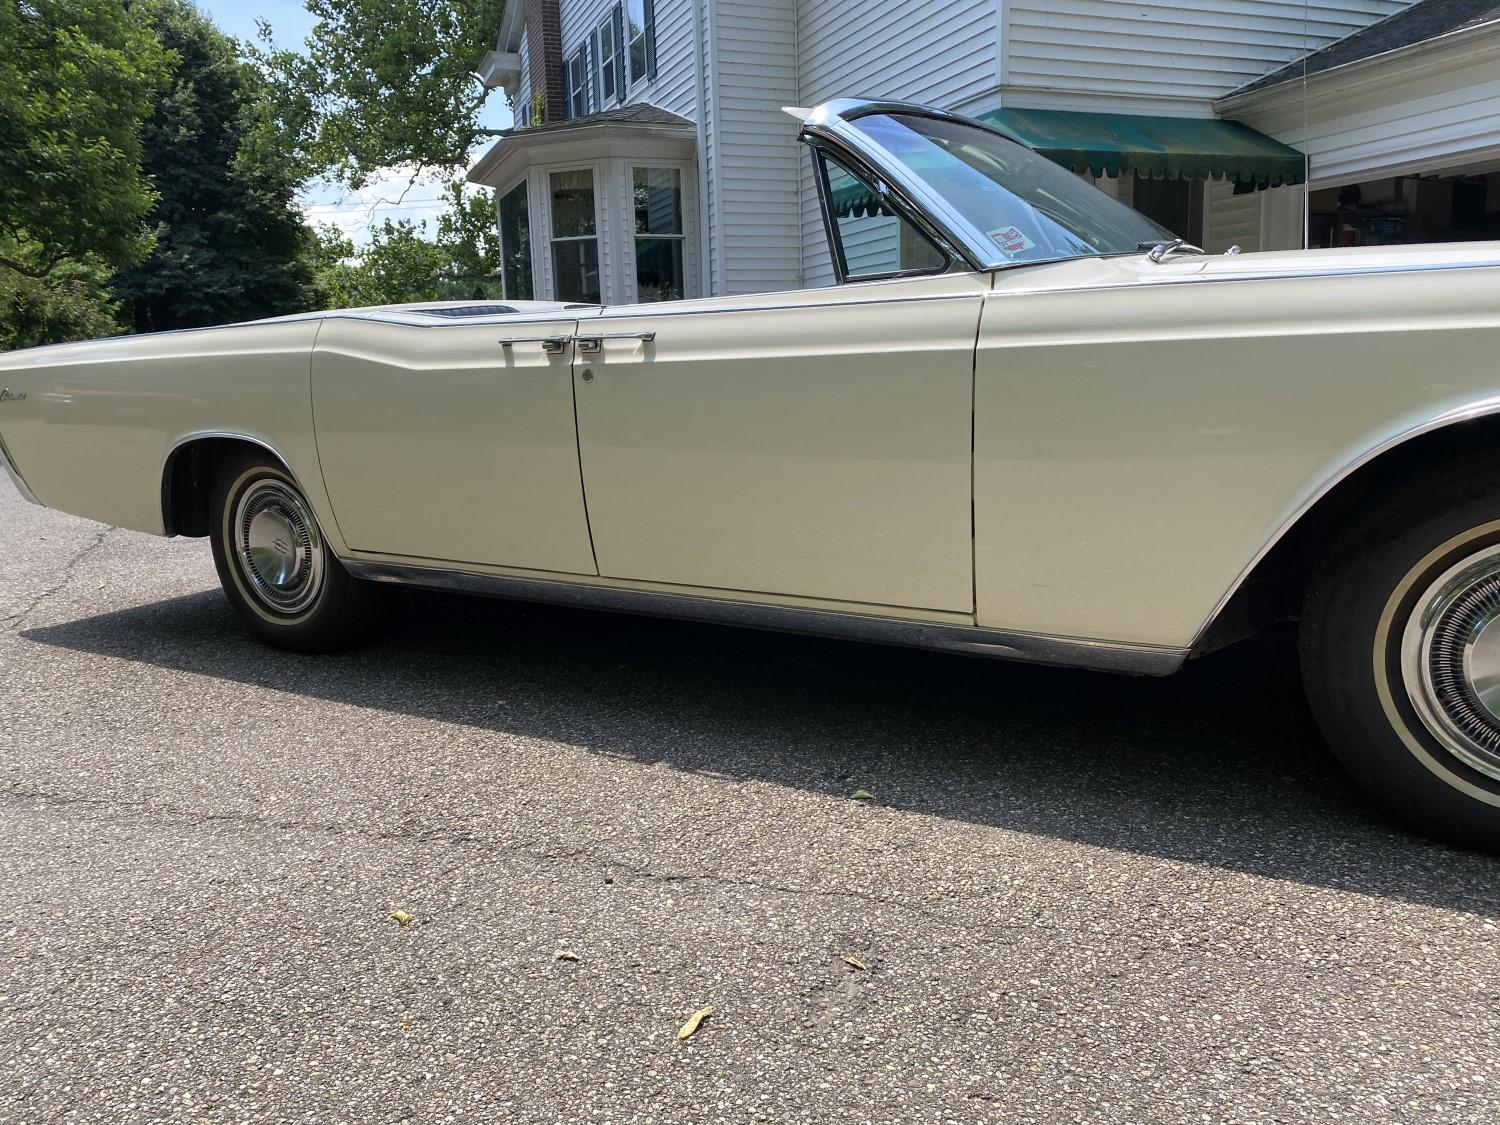 Single owner 1966 Lincoln Continental Convertible in Excellent Condition